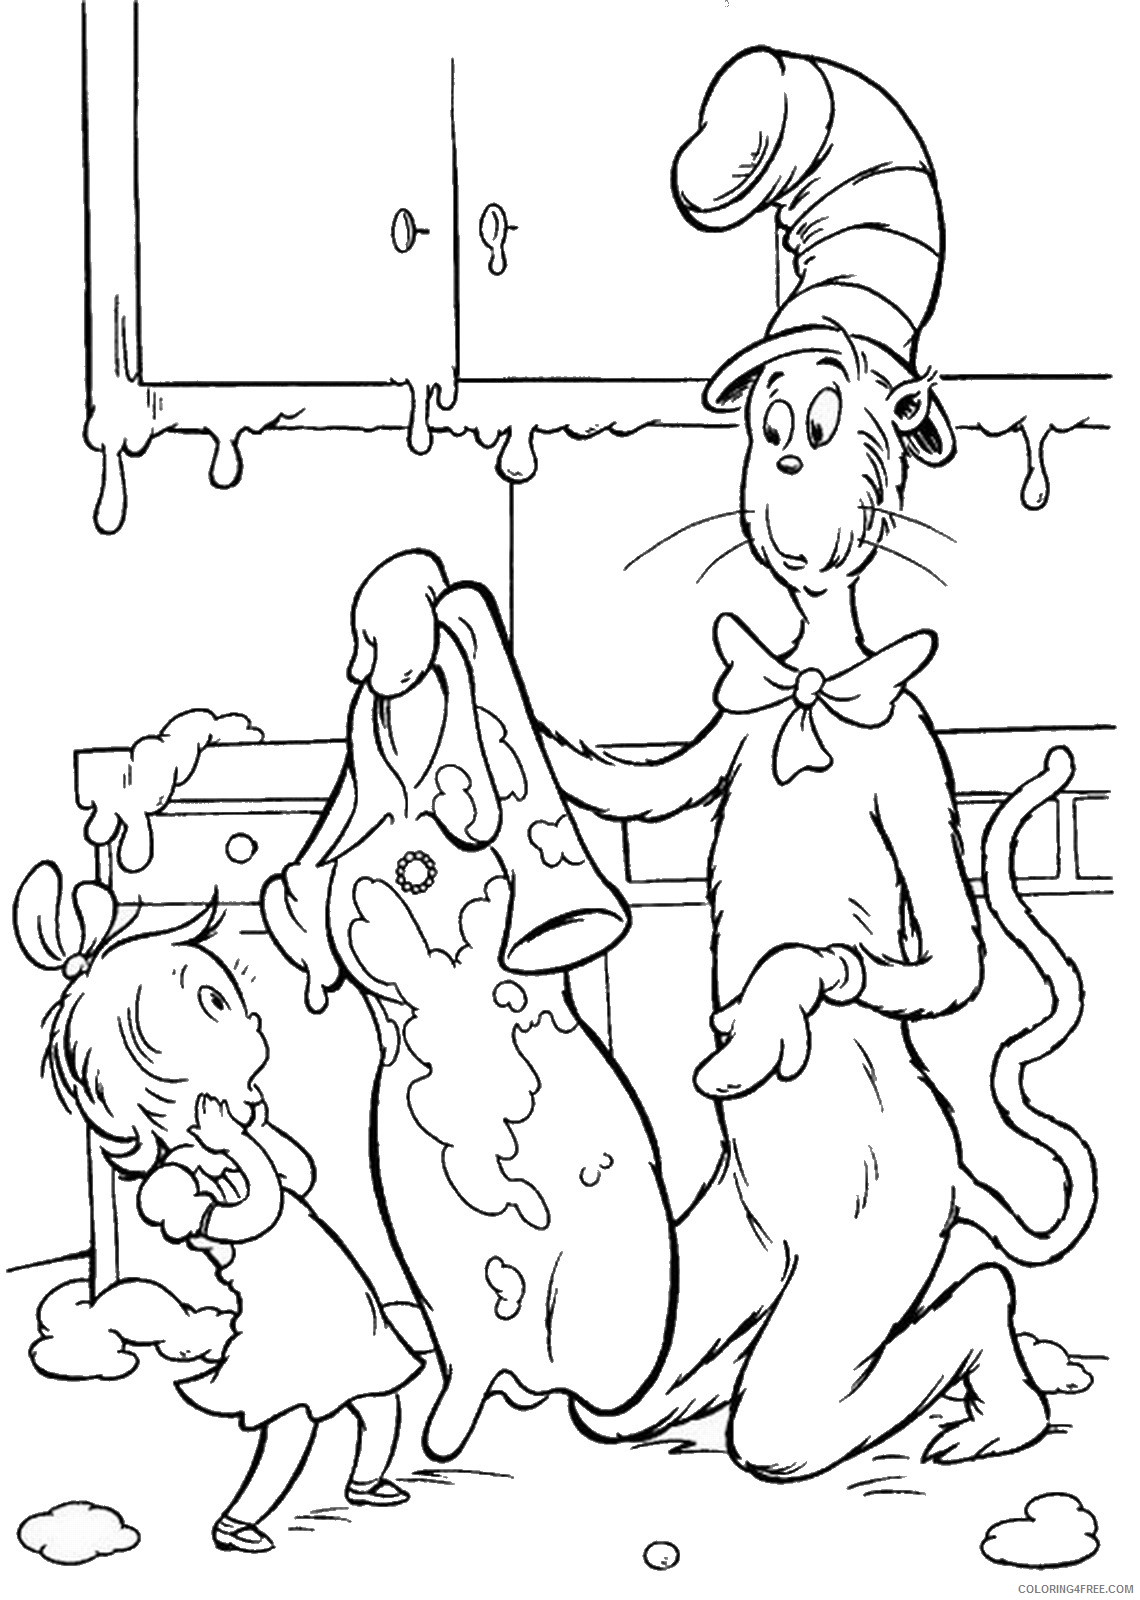 The Cat in the Hat Coloring Pages Cartoons cat_hat_cl_35 Printable 2020 6397 Coloring4free